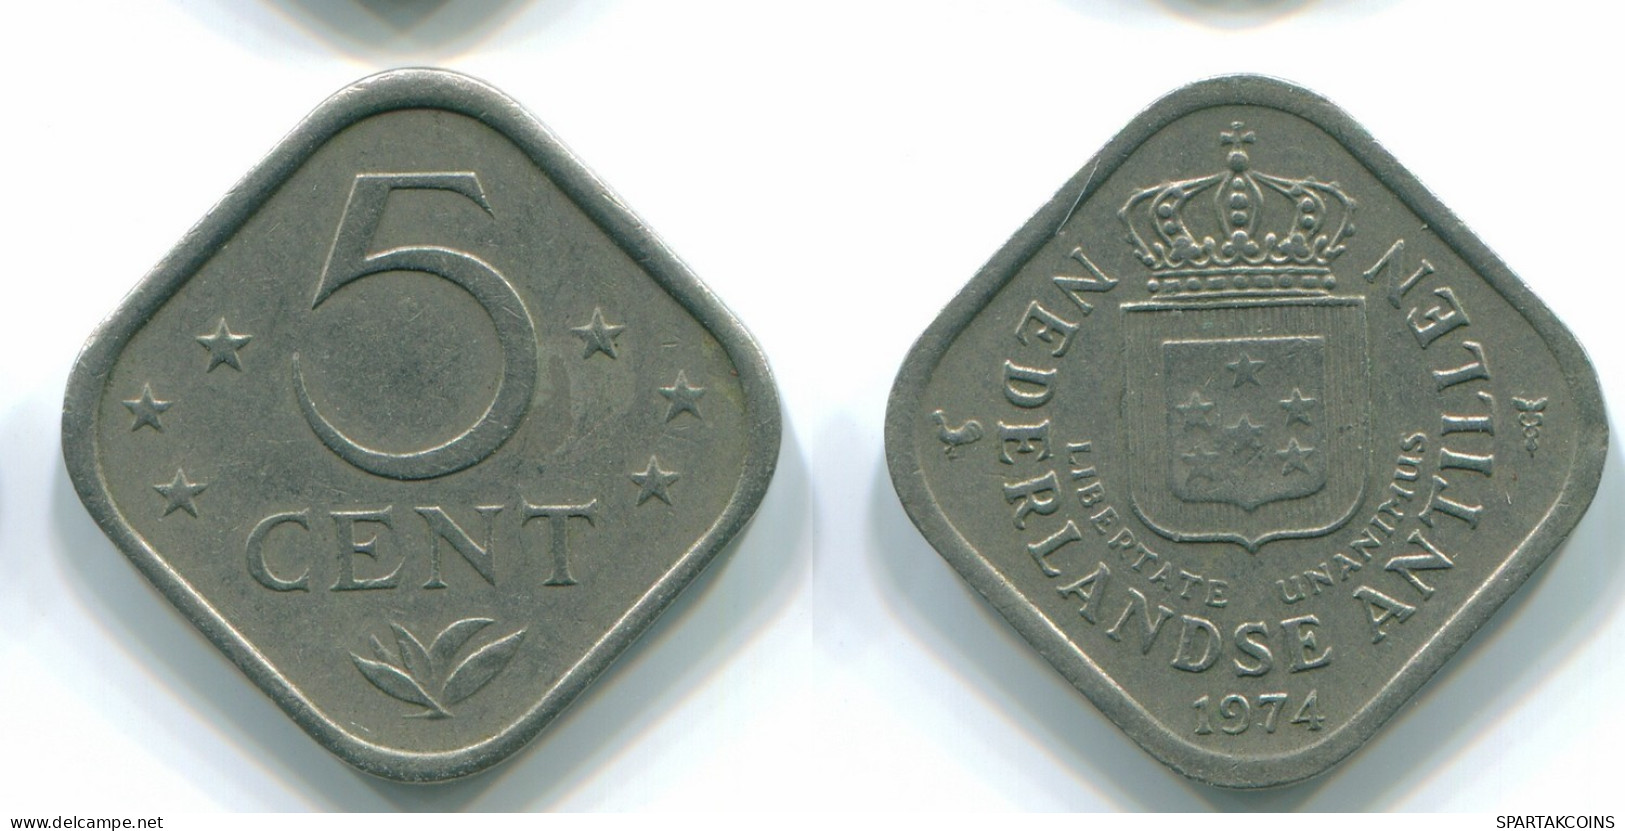 5 CENTS 1974 NETHERLANDS ANTILLES Nickel Colonial Coin #S12221.U.A - Netherlands Antilles